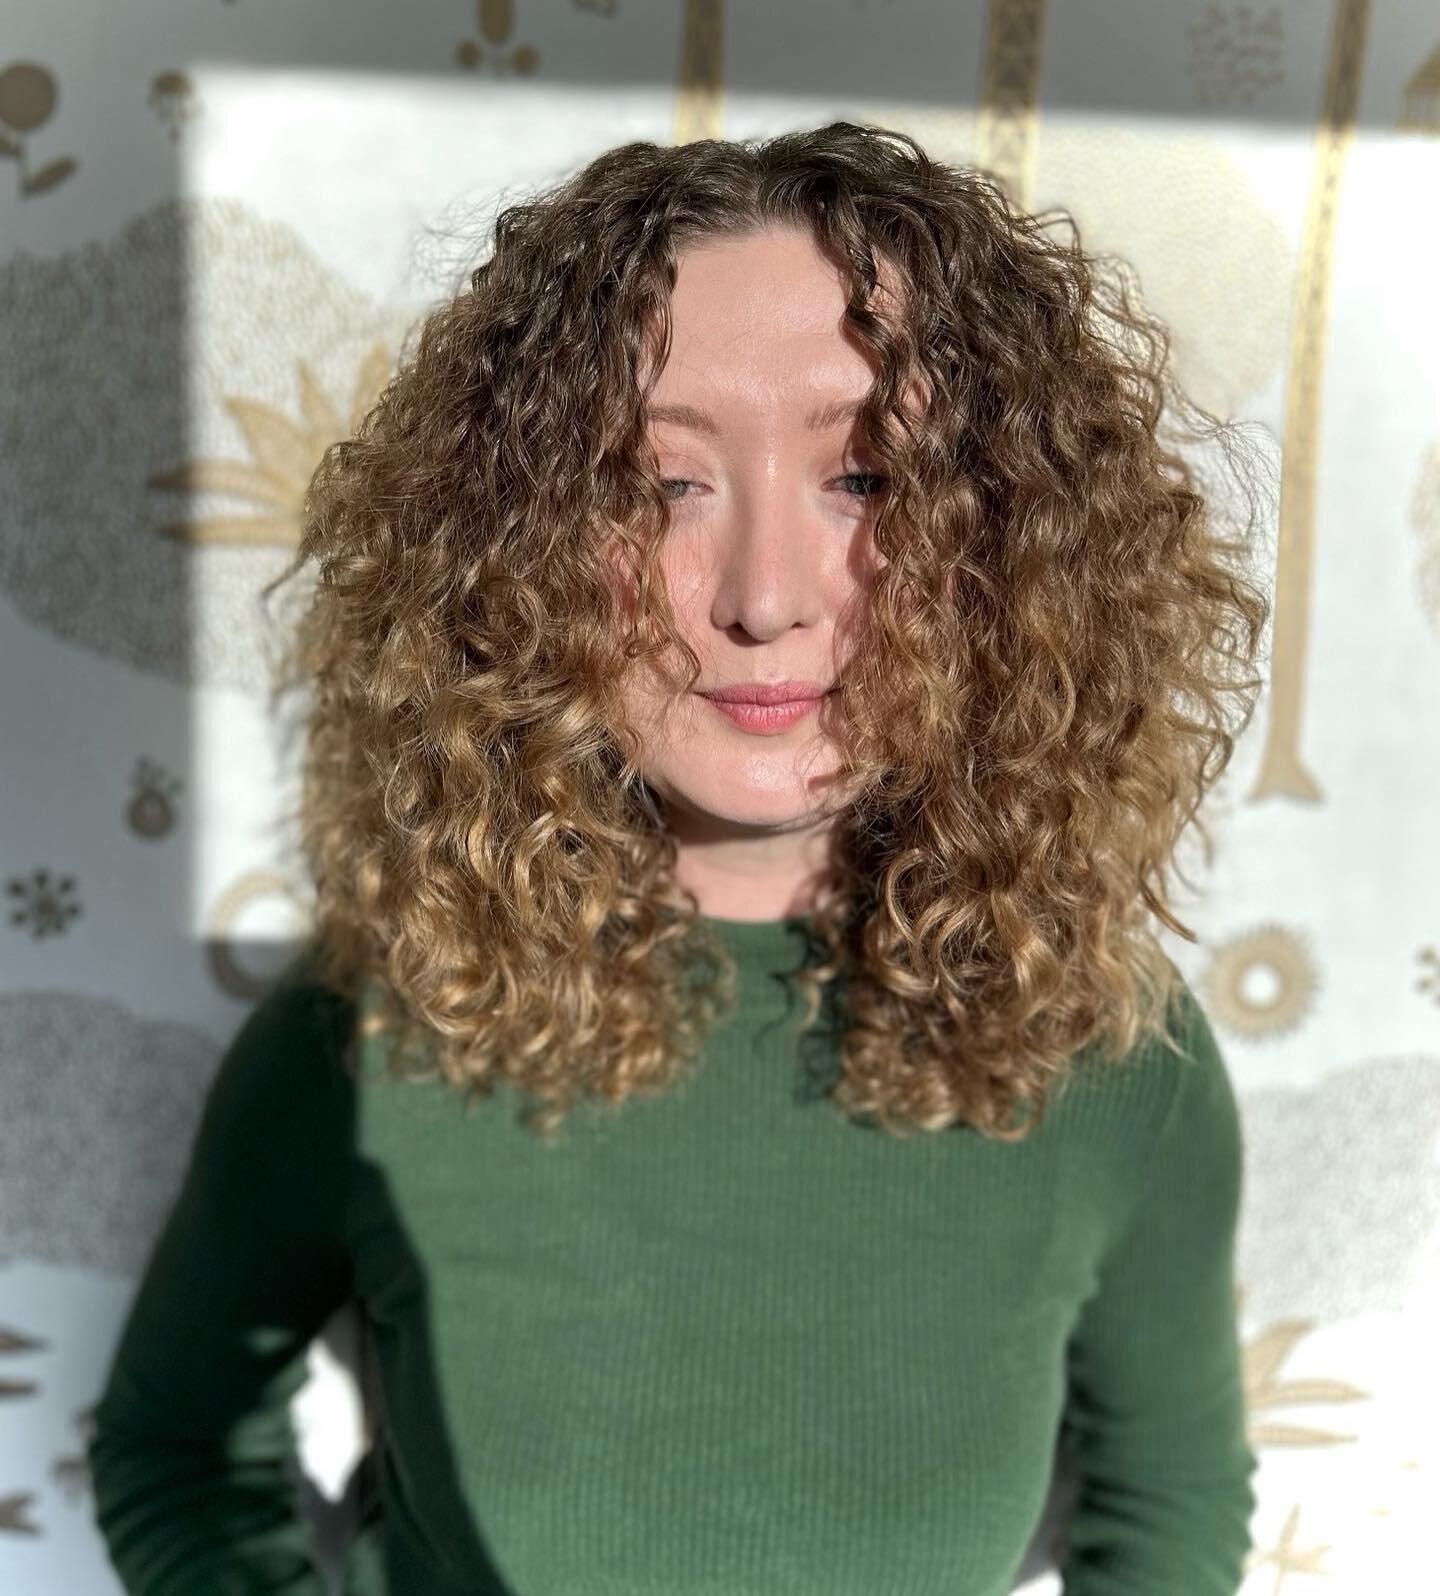 Ahhhmazing curly cut (before the shampoo and style) by Crystal @crystallake_ . Done at Vacation Club
.
.
.
 #vacationclub #vacationclubpdx #portlandsalon #humboldtneighborhood #humboldtportland #portlandsbestsalon #crafthairstyle #pdxhair #portlandha